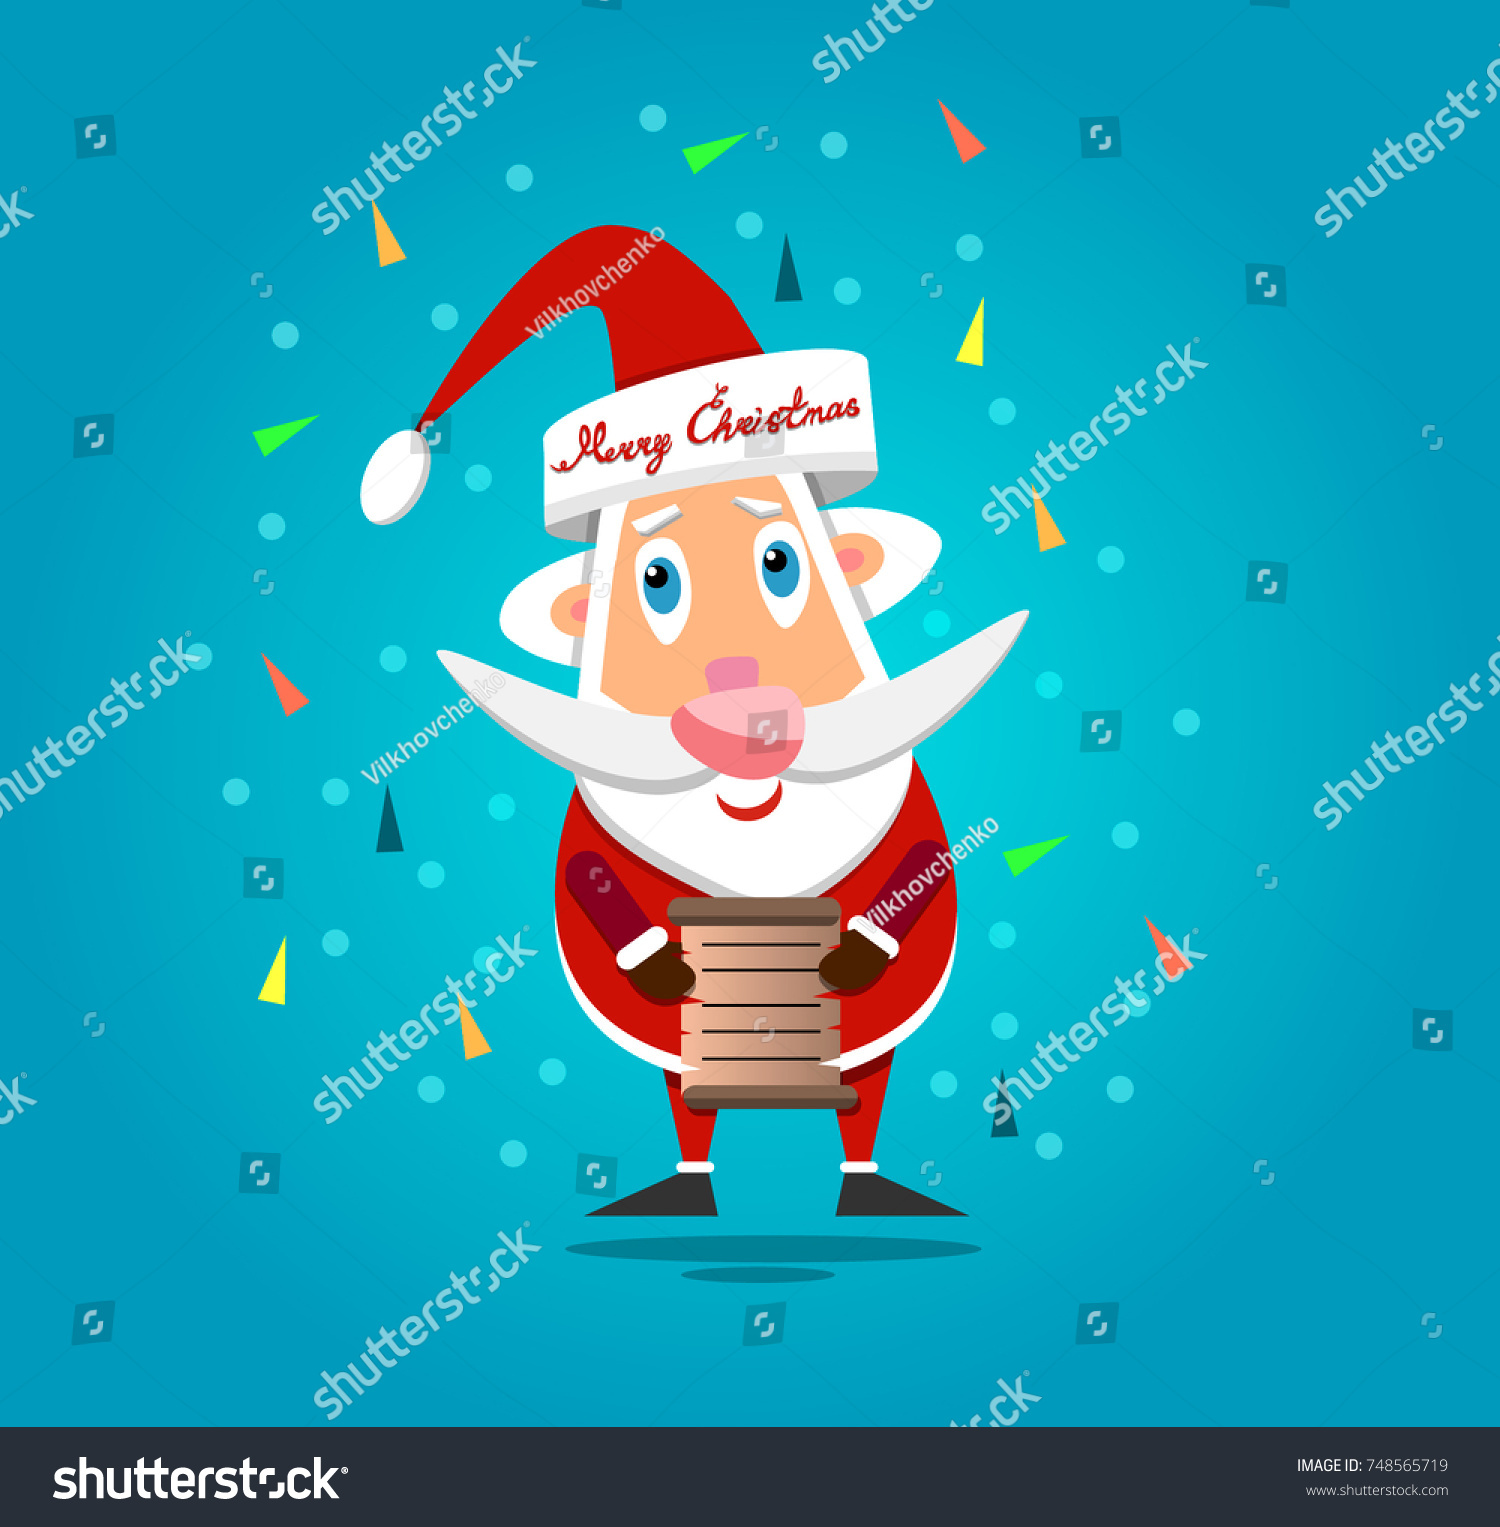 Vector image of Santa Claus with a list of ts